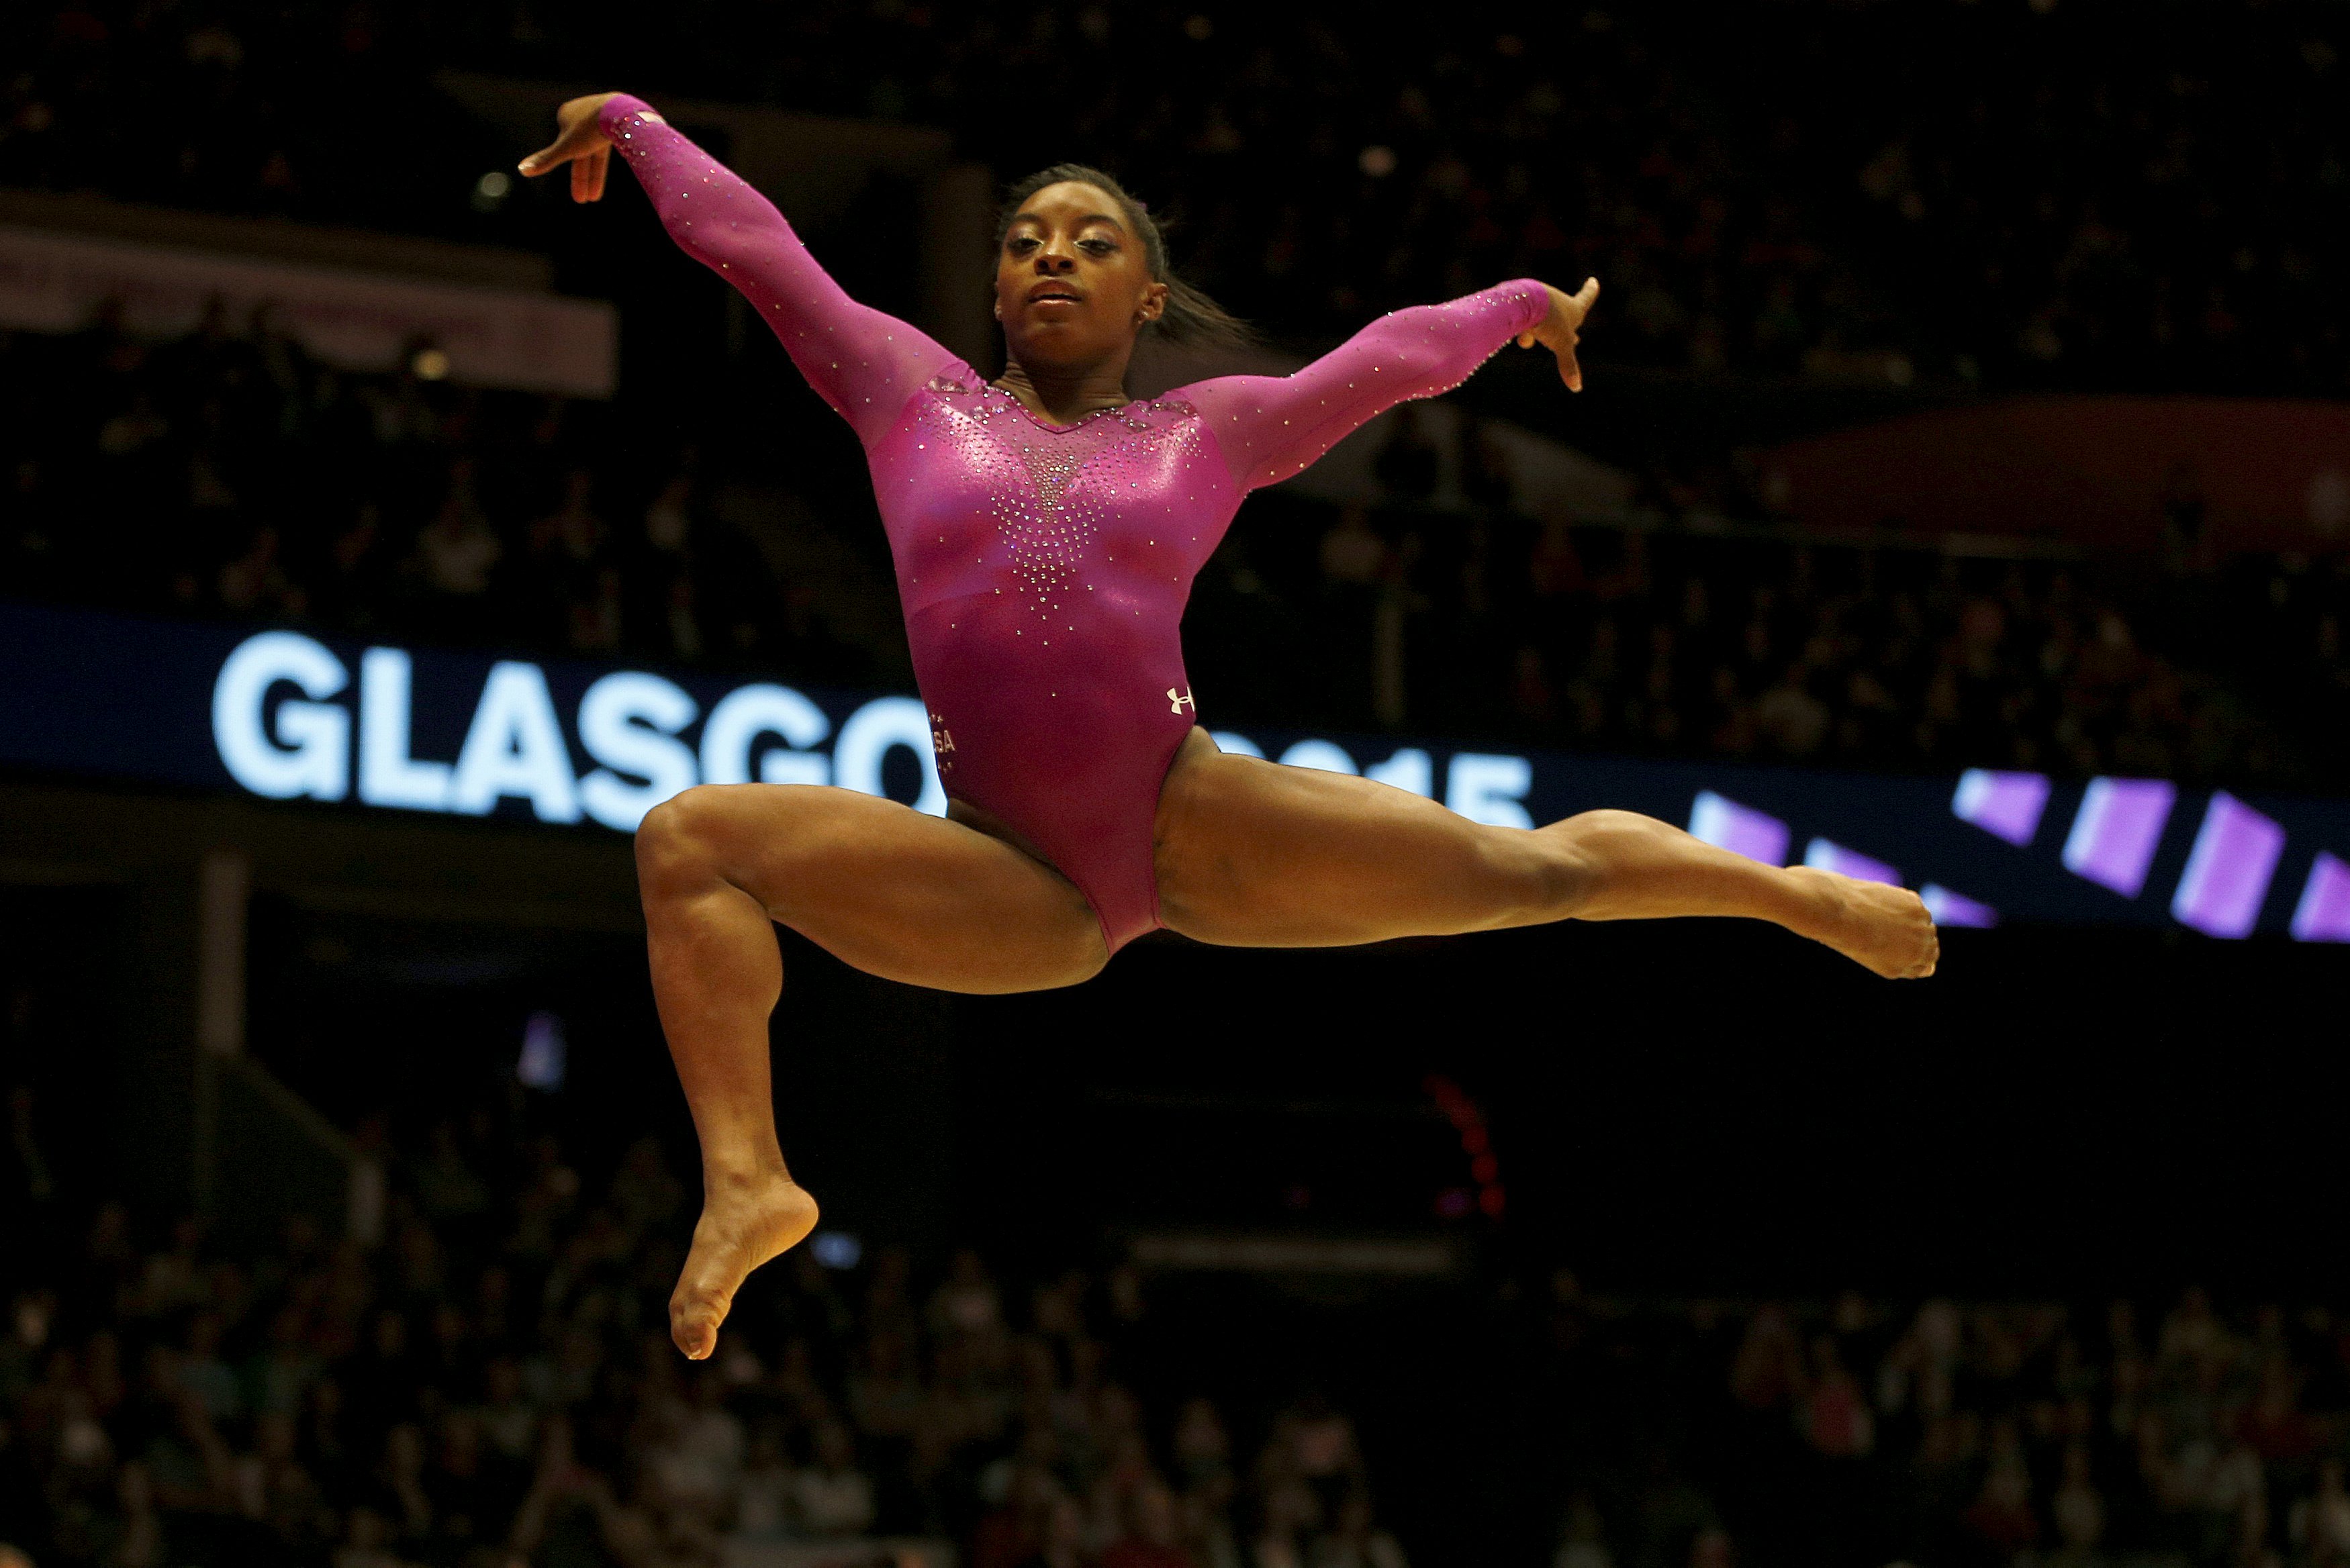 Us Gymnast Earns Record World Championship Gold Medals Cbs News